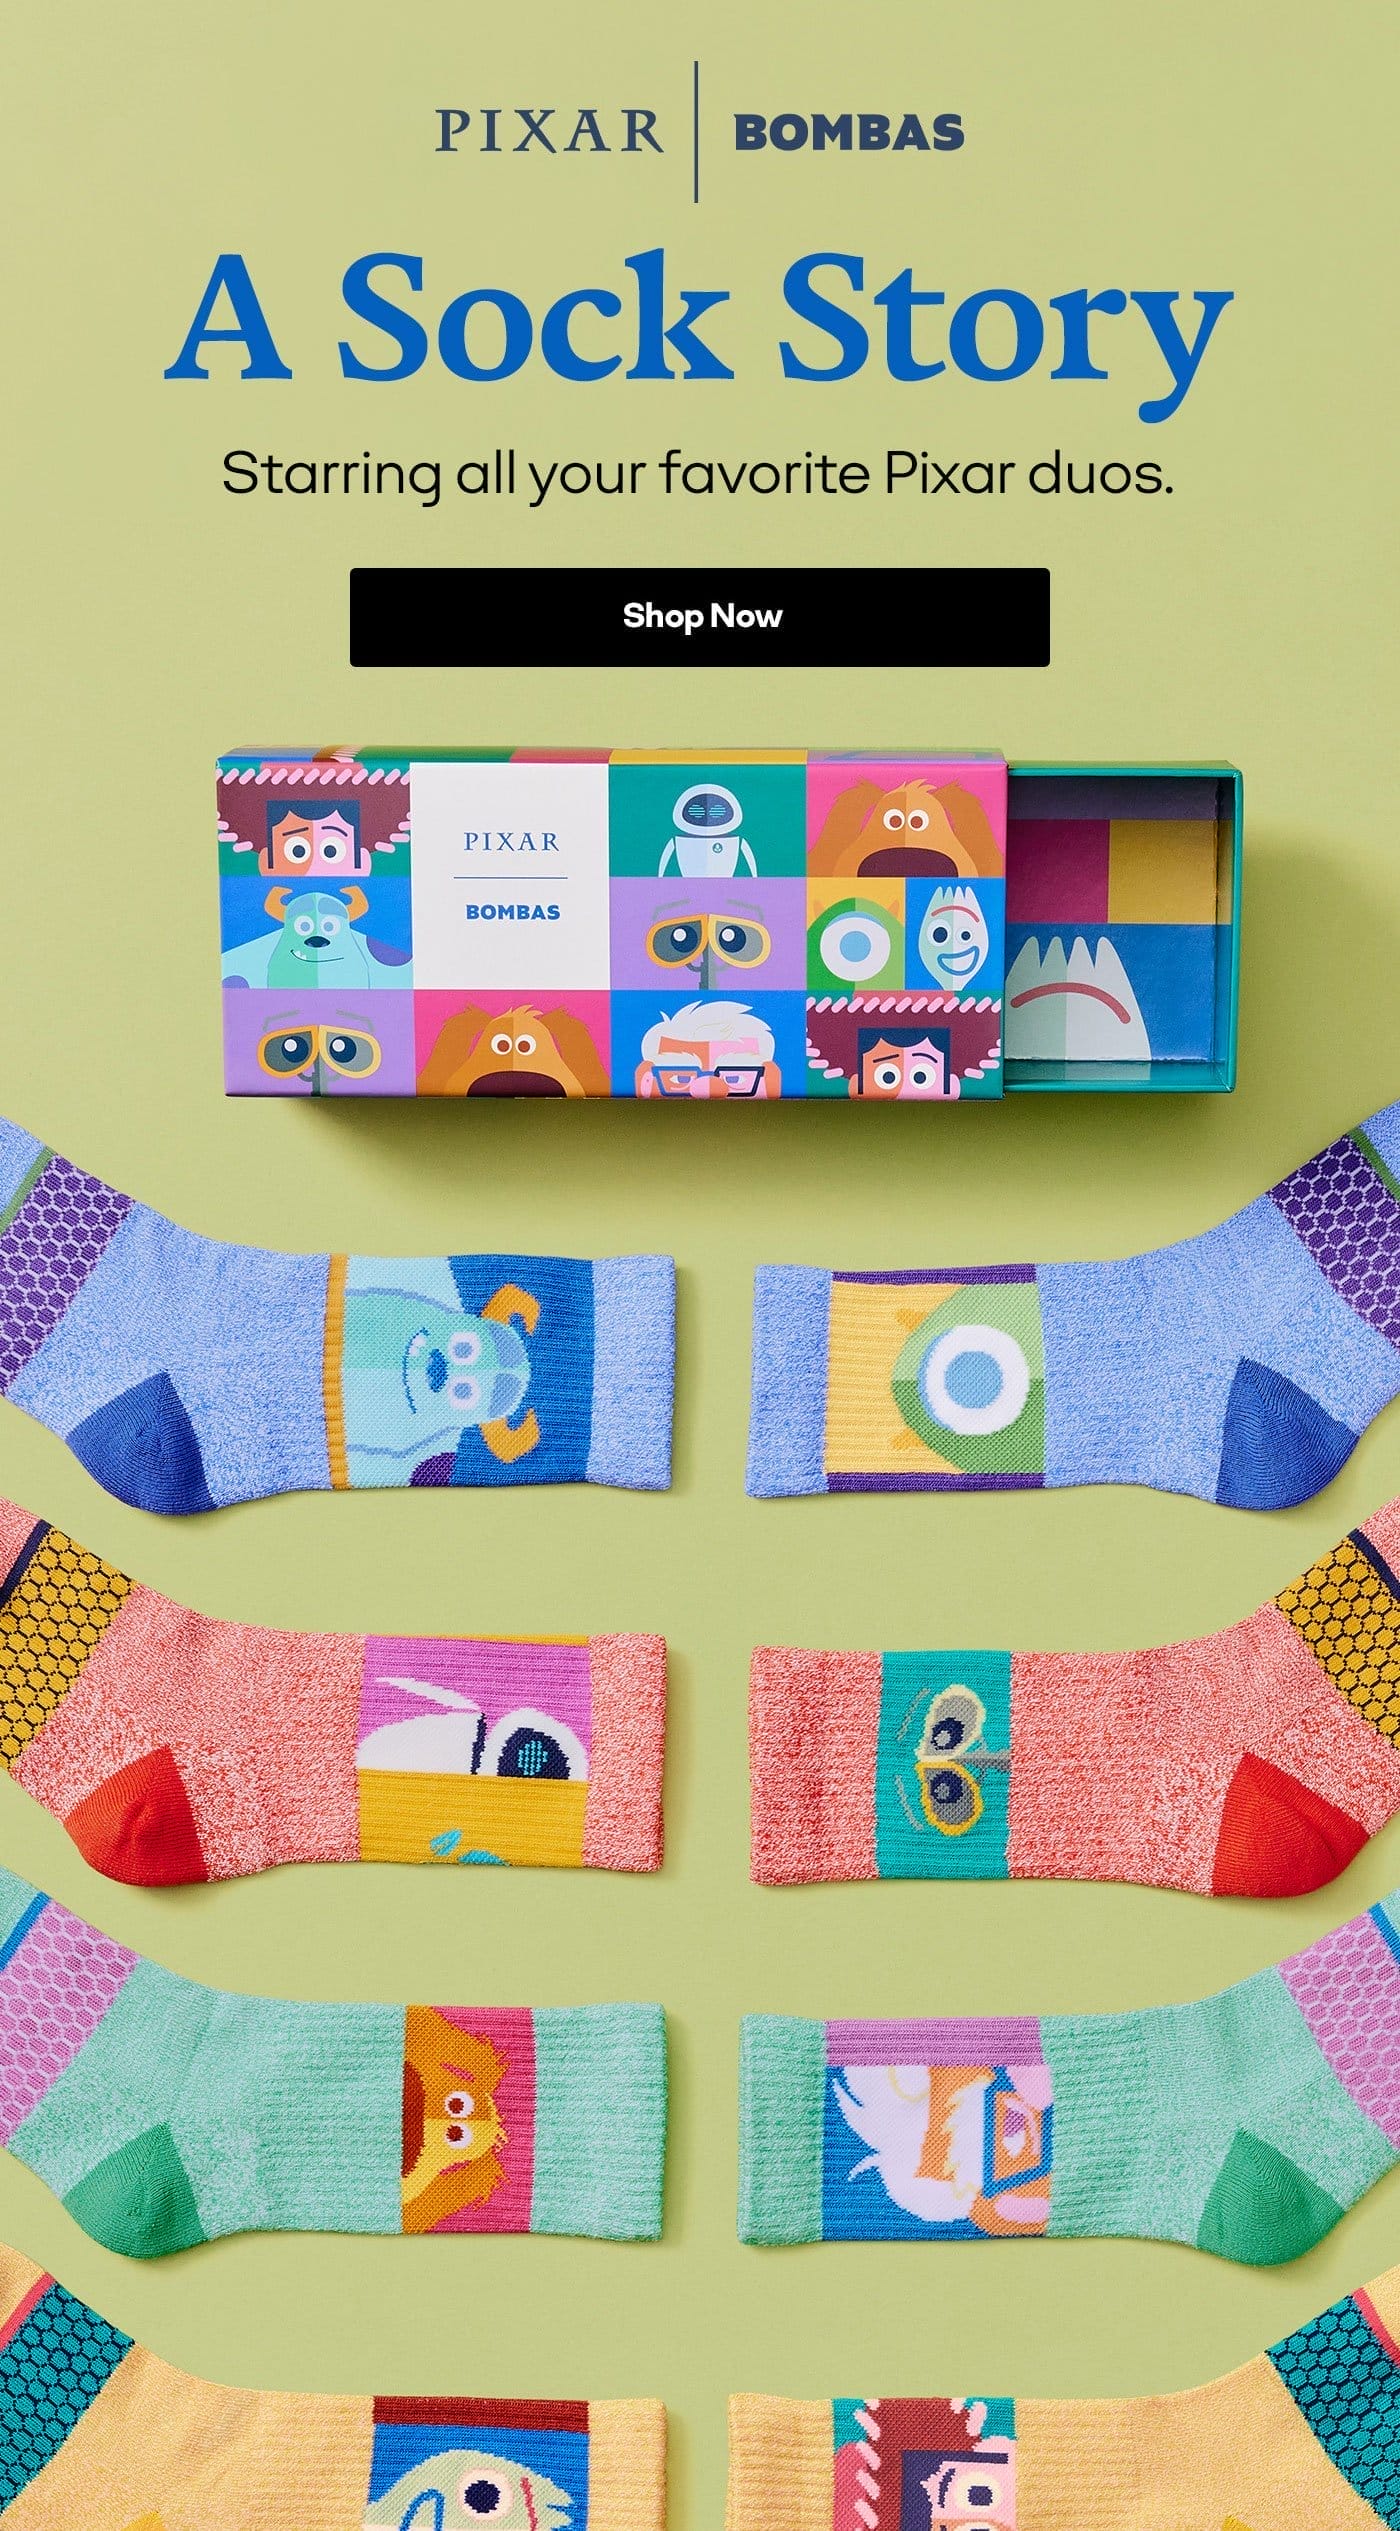 PIXAR | BOMBAS | A Sock Story | Starring all your favorite Pixar duos. | Shop Now